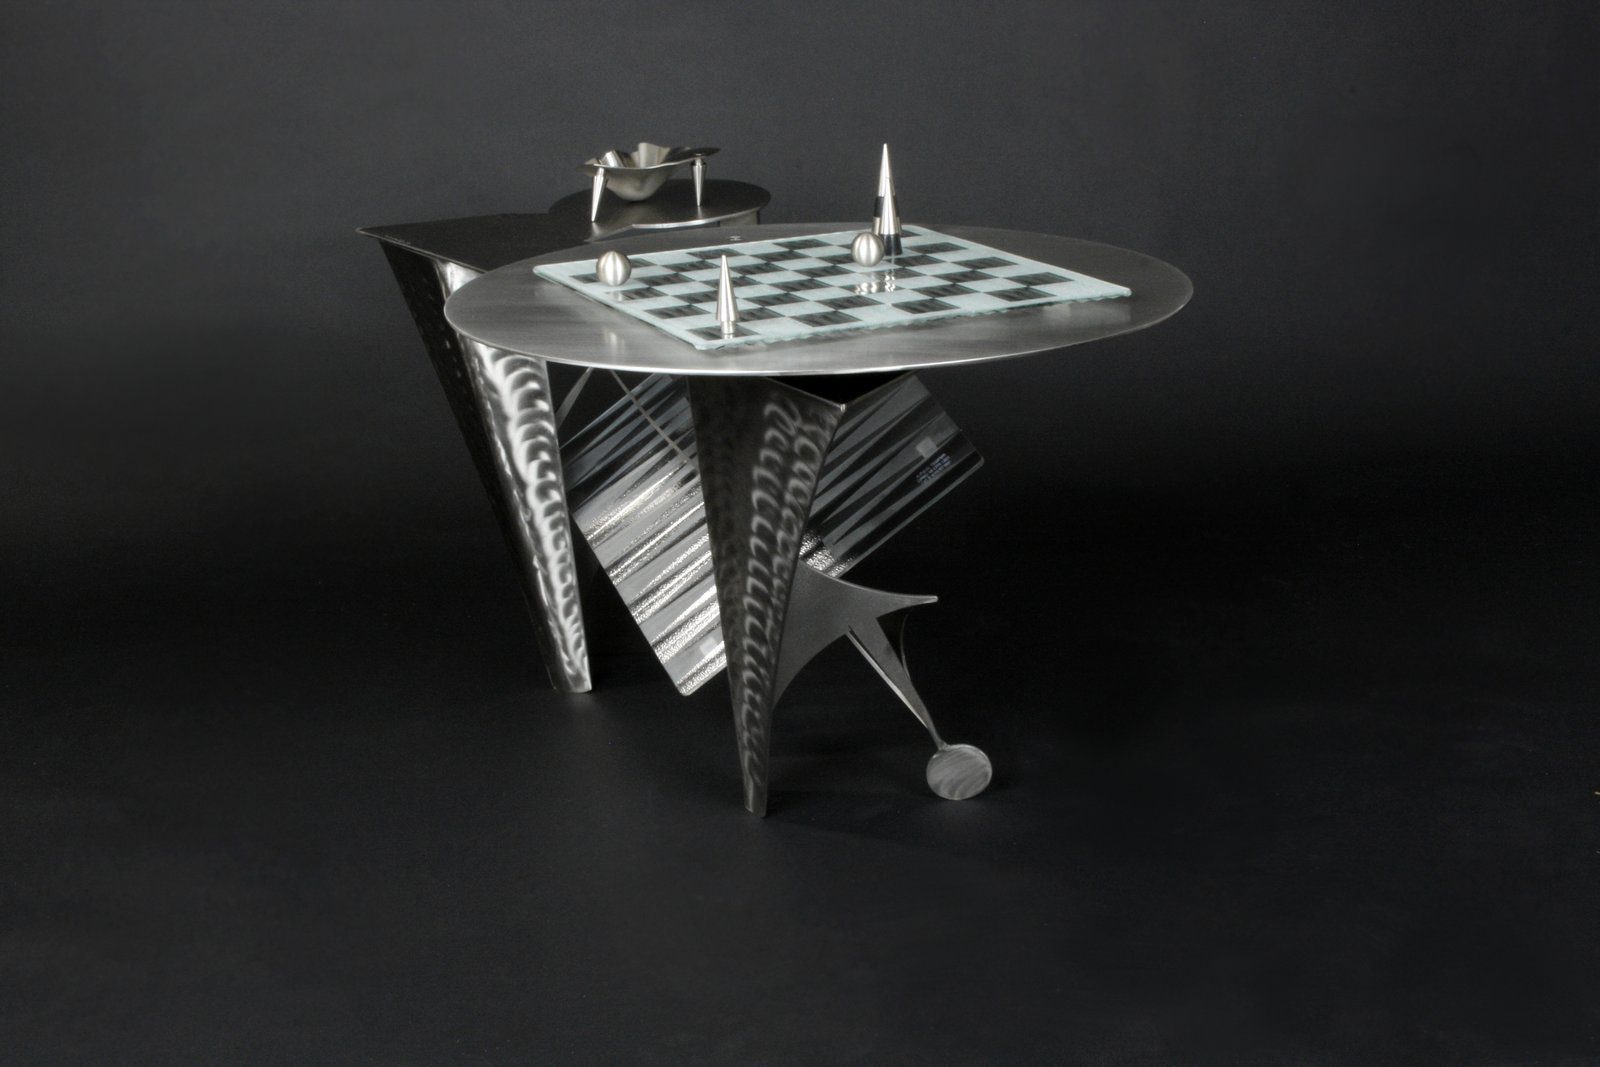 A table with a chess board on it.